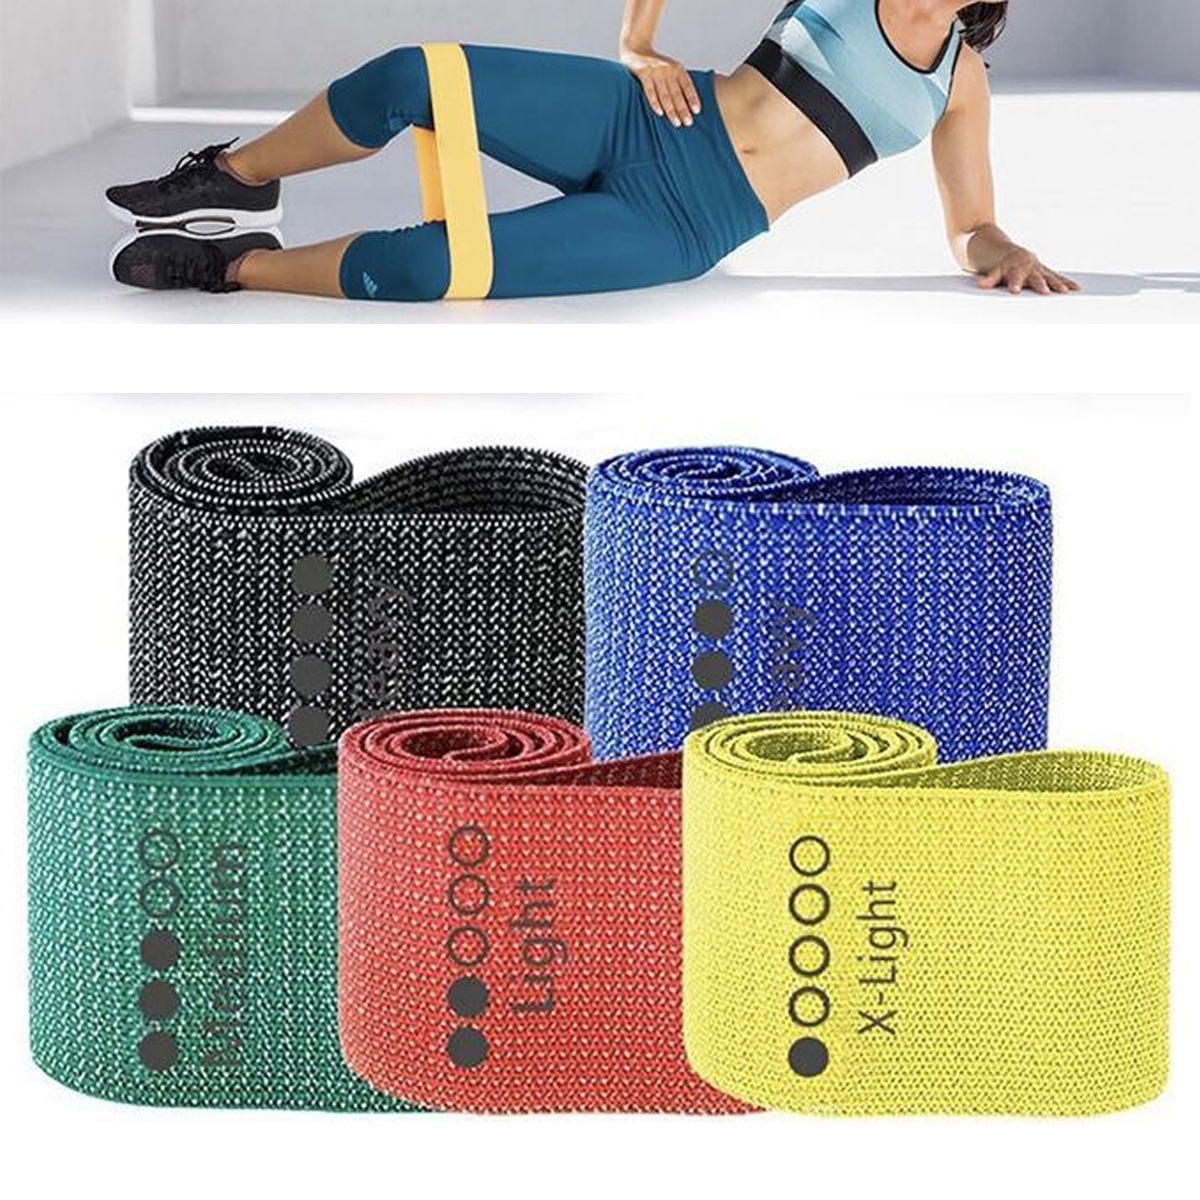 Exercise Hip Bands with non slip design, 5 sorted (color )Levels of Resistance